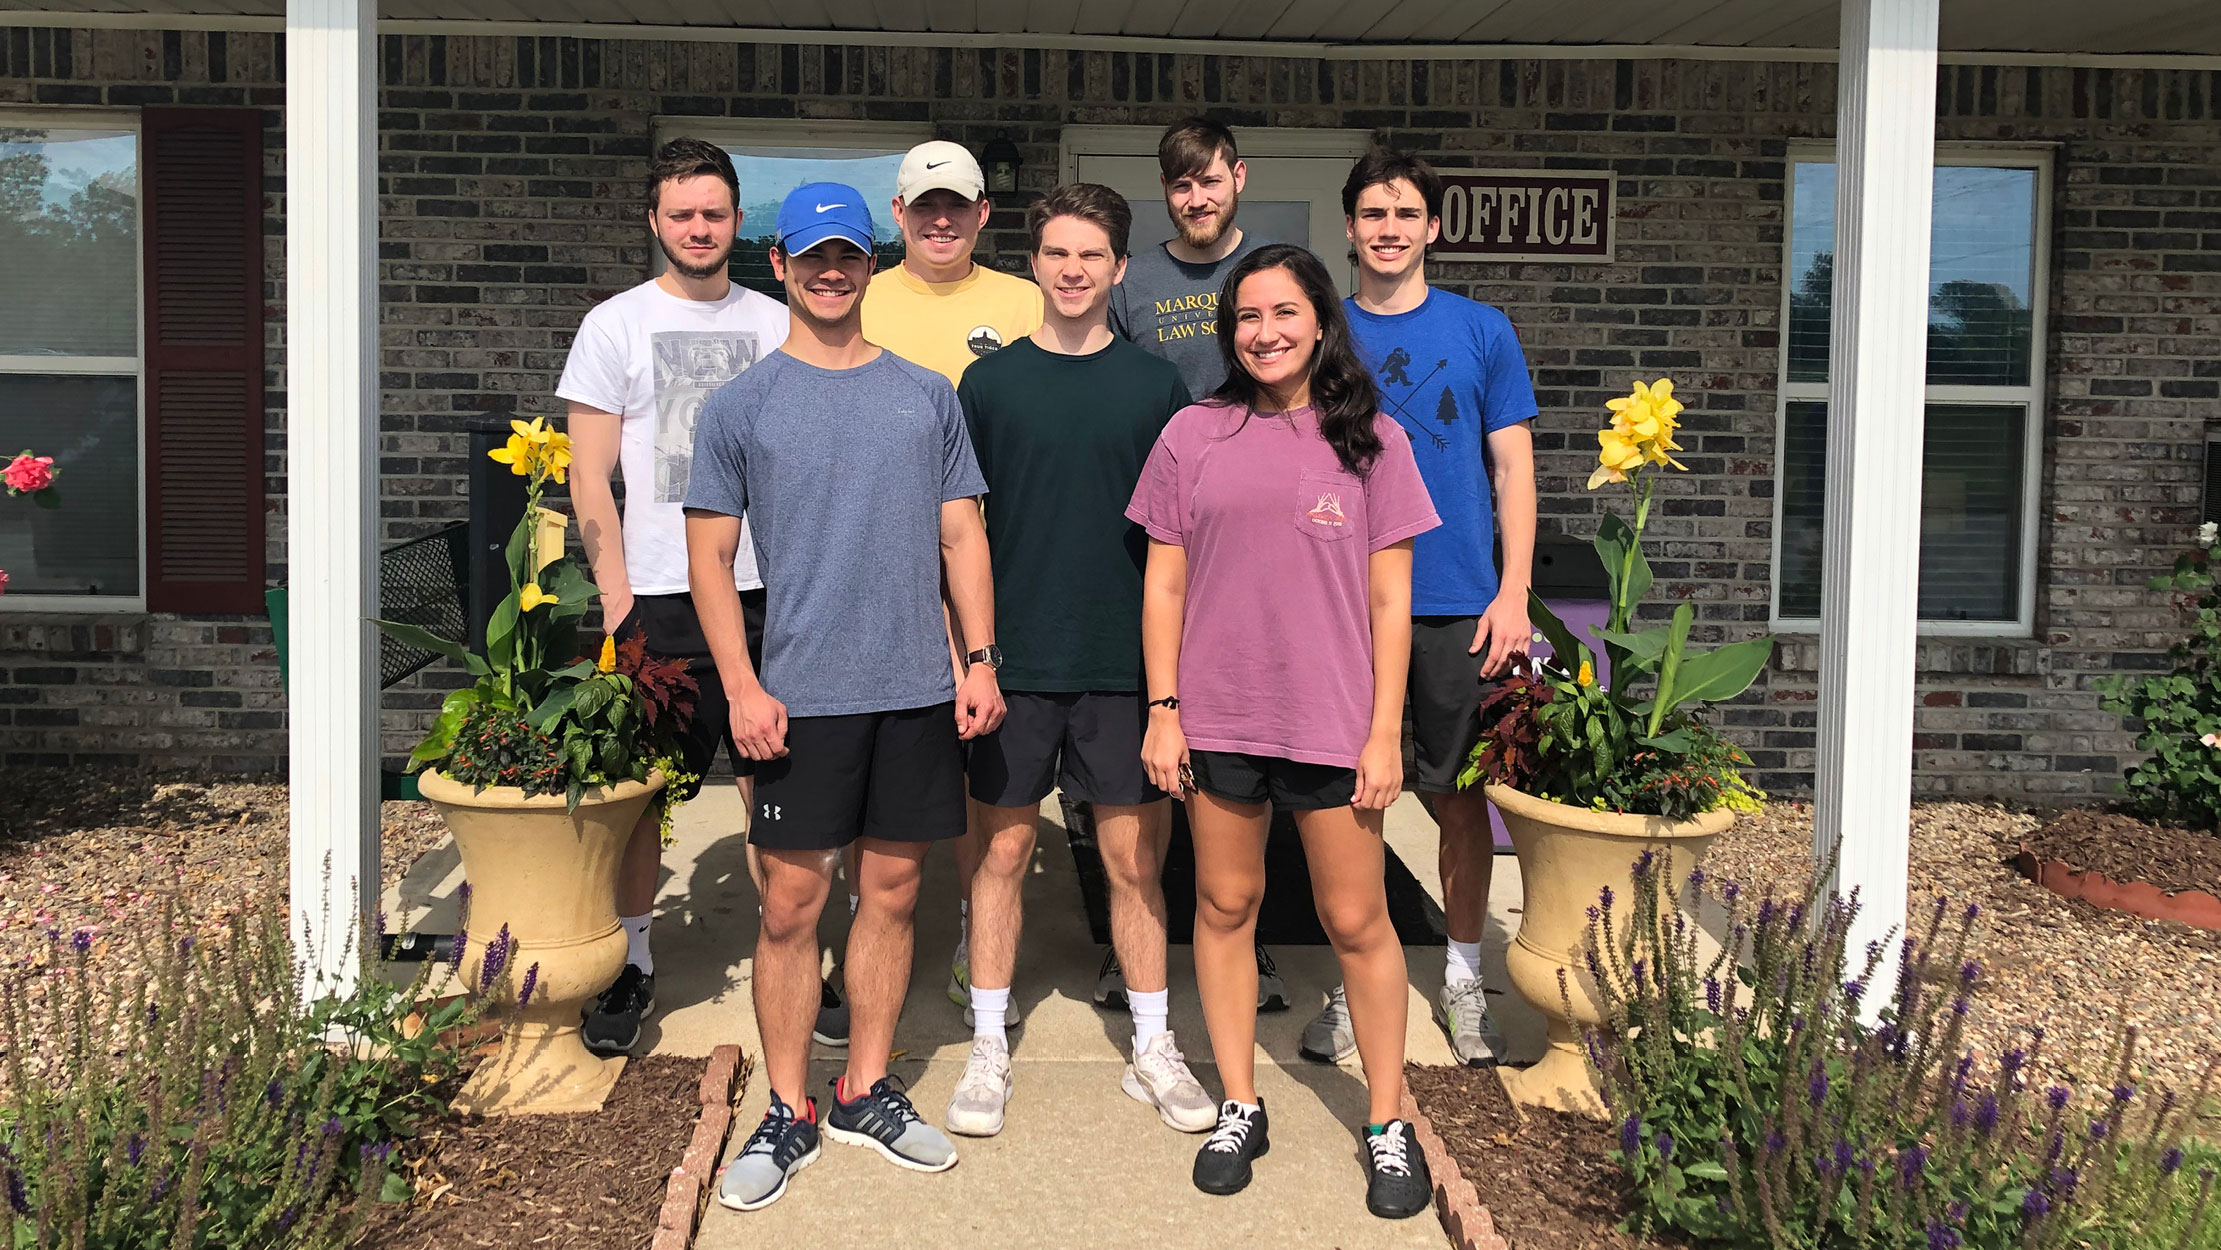 During the second day of intern orientation, the Altanta, Georgia and Columbia, Missouri interns both spent time volunteering at a unit turn at a nearby Fairway Management community.